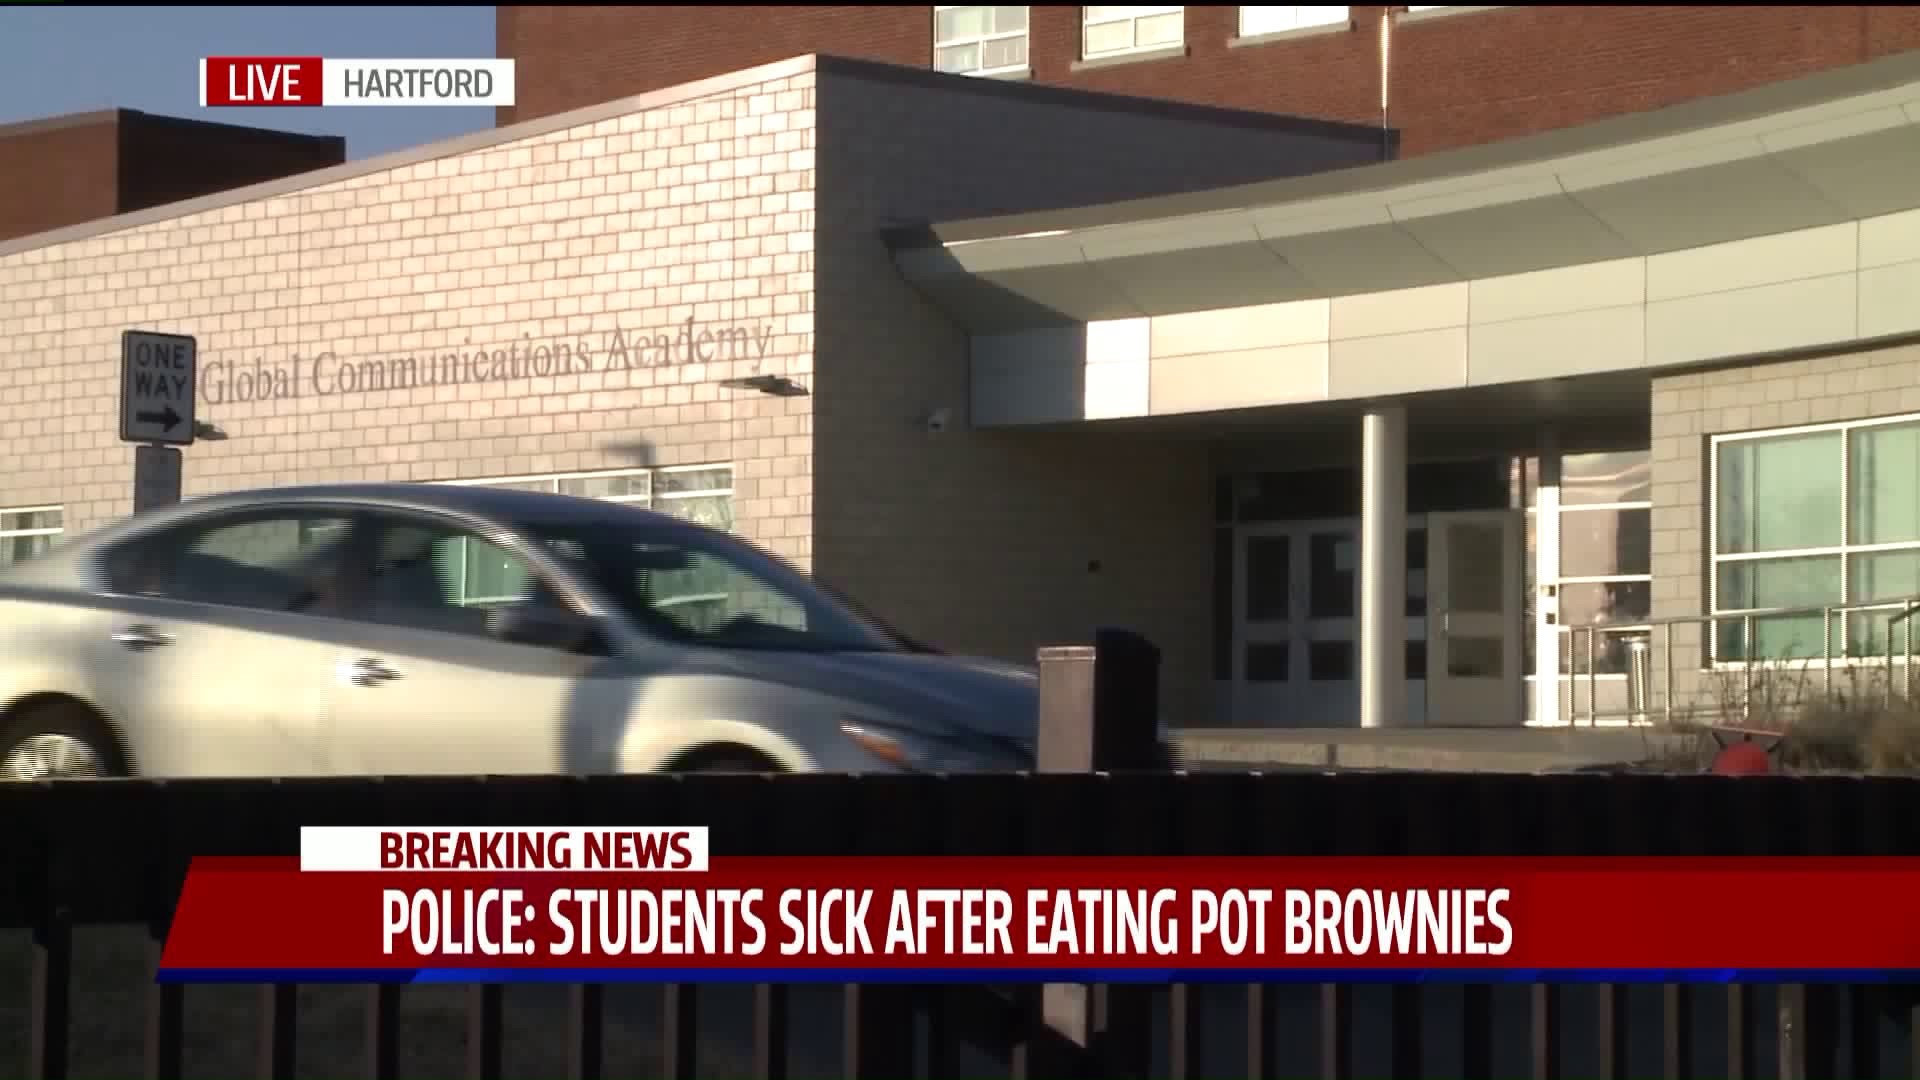 17 Hartford students sickened by pot brownies: Police